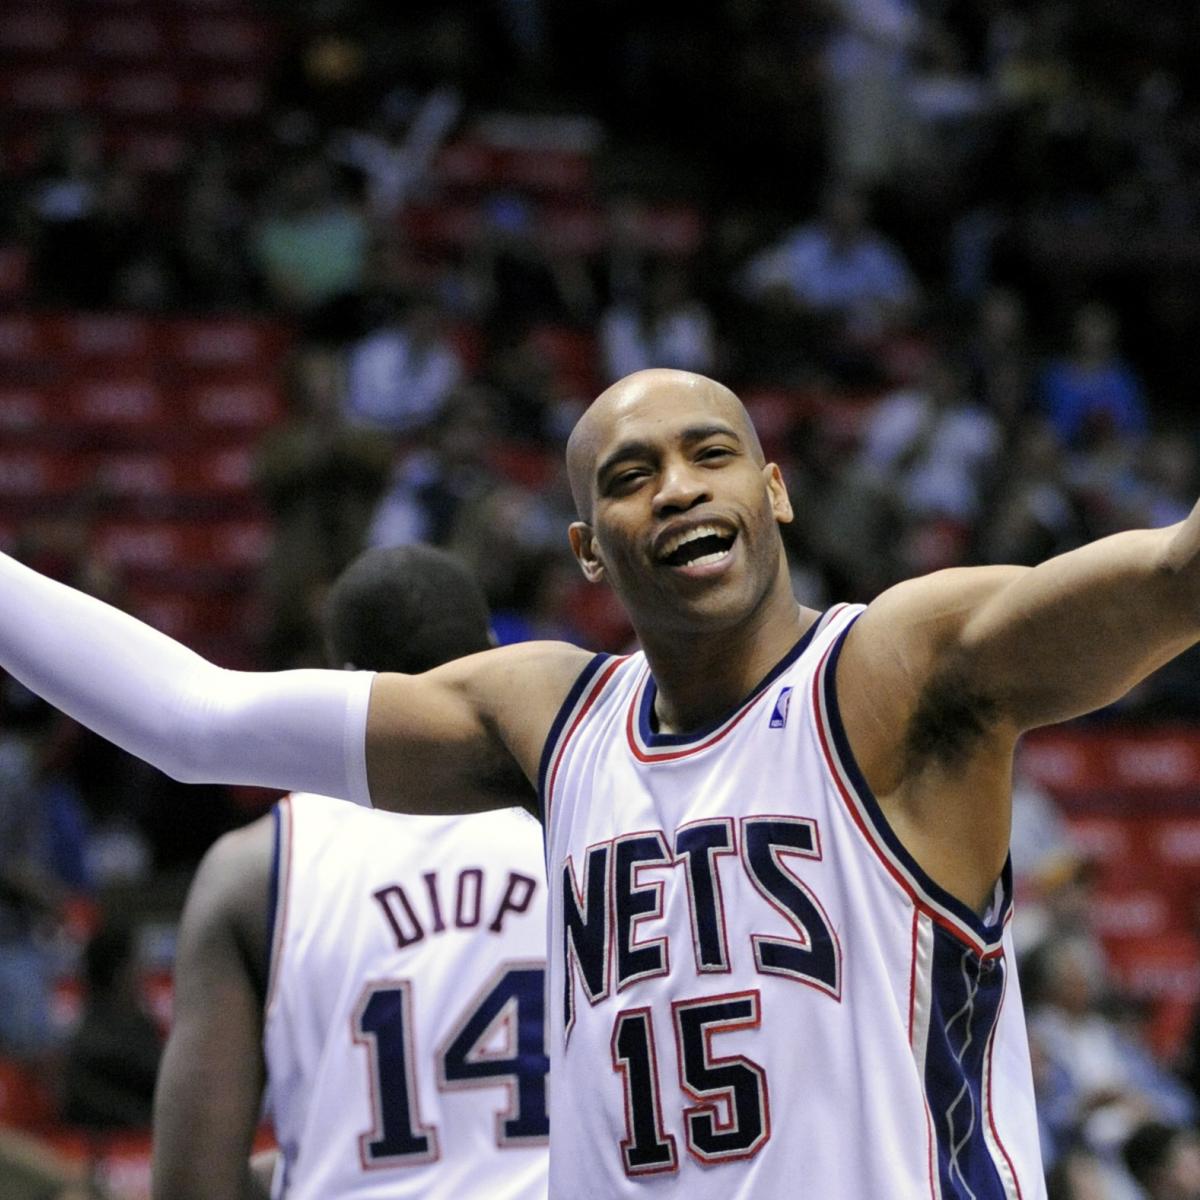 The Brooklyn Nets should absolutely retire Vince Carter's number